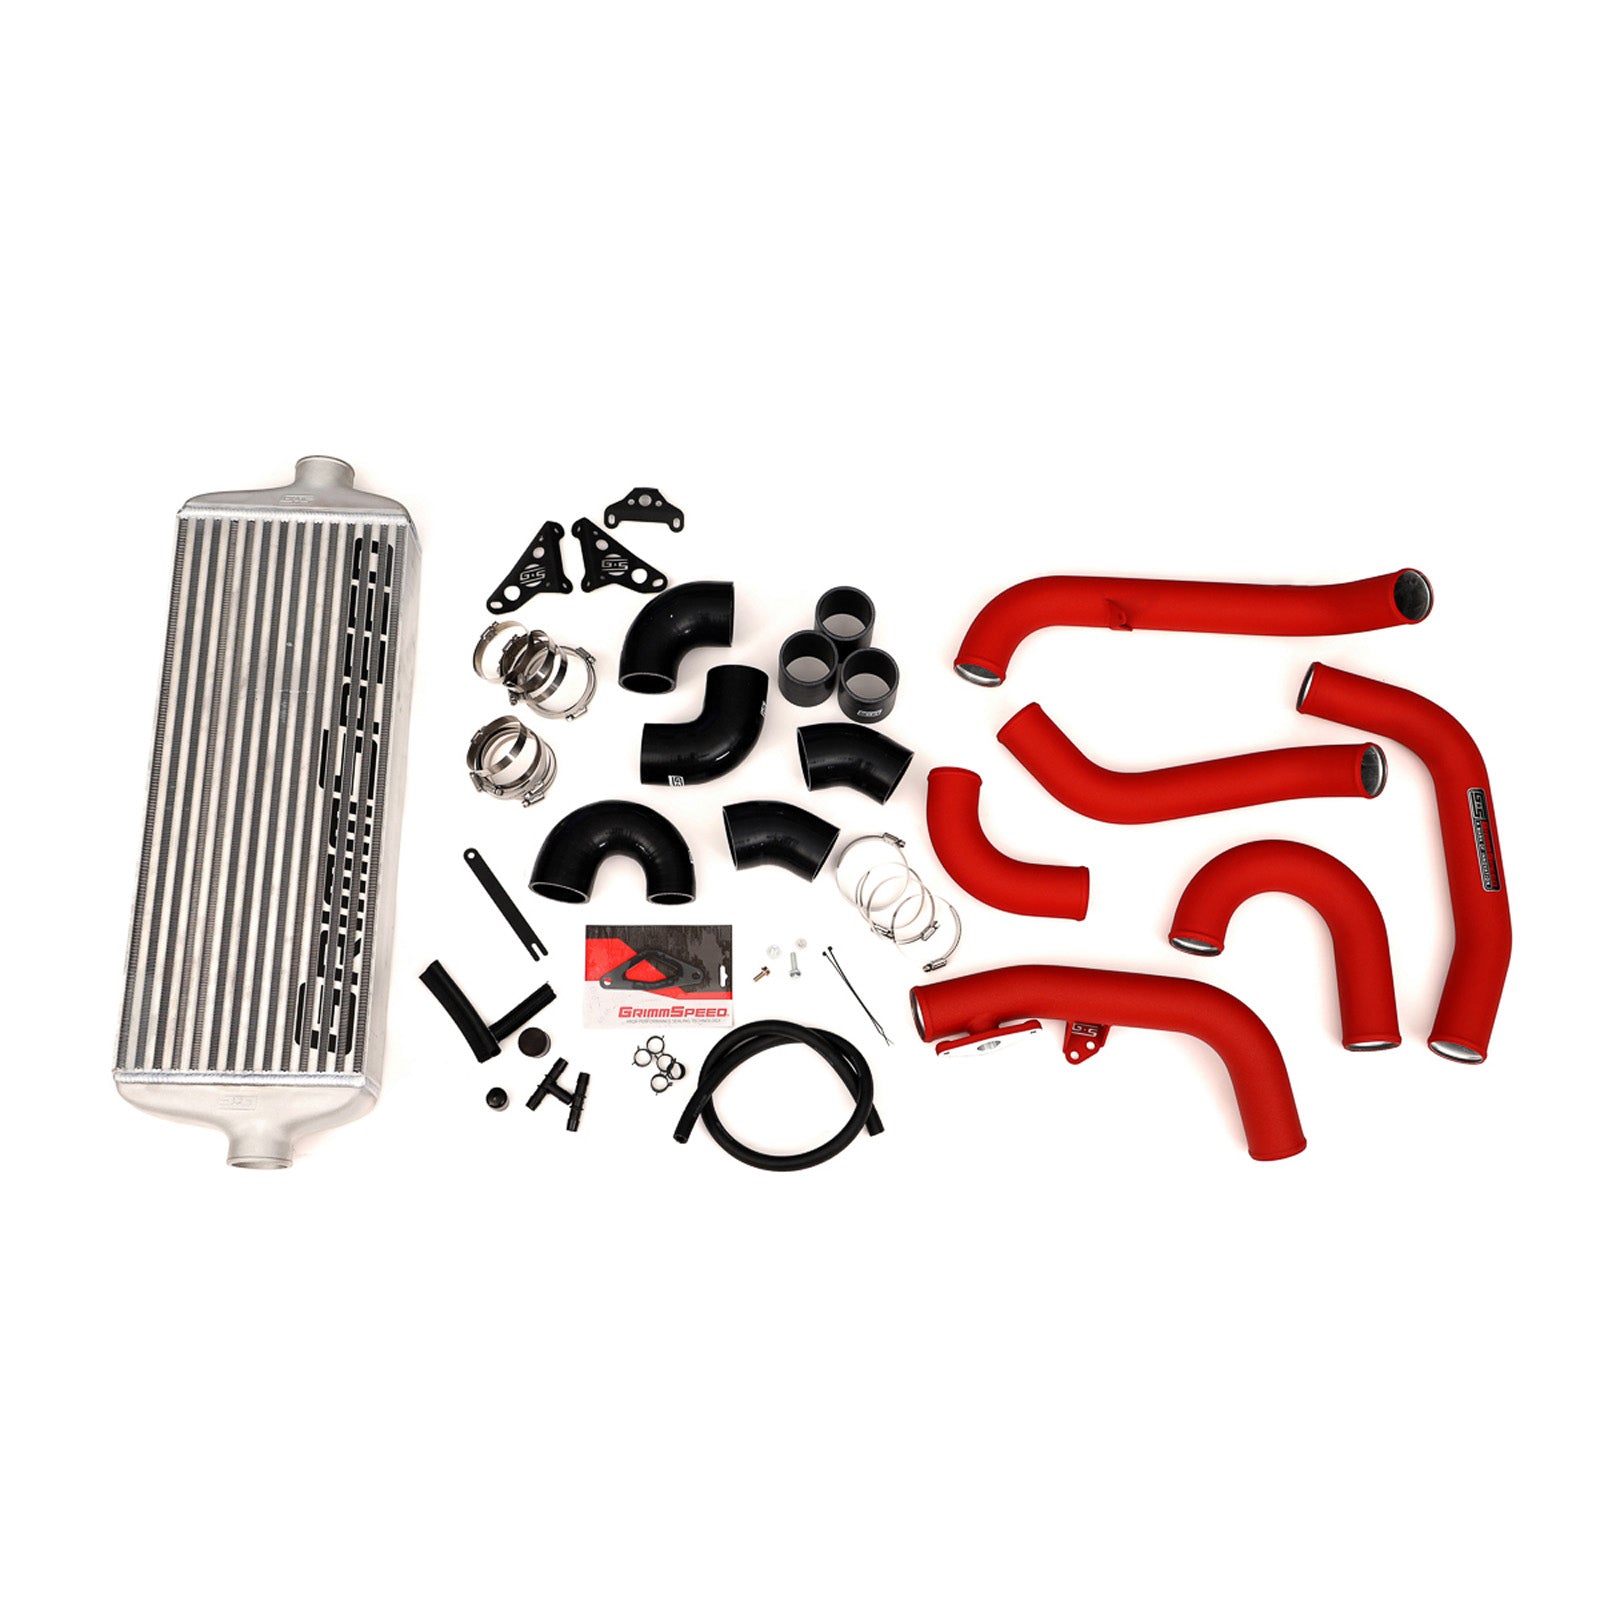 GrimmSpeed Front Mount Intercooler Kit - Raw Core with Red Piping - 2015-21 Subaru STI